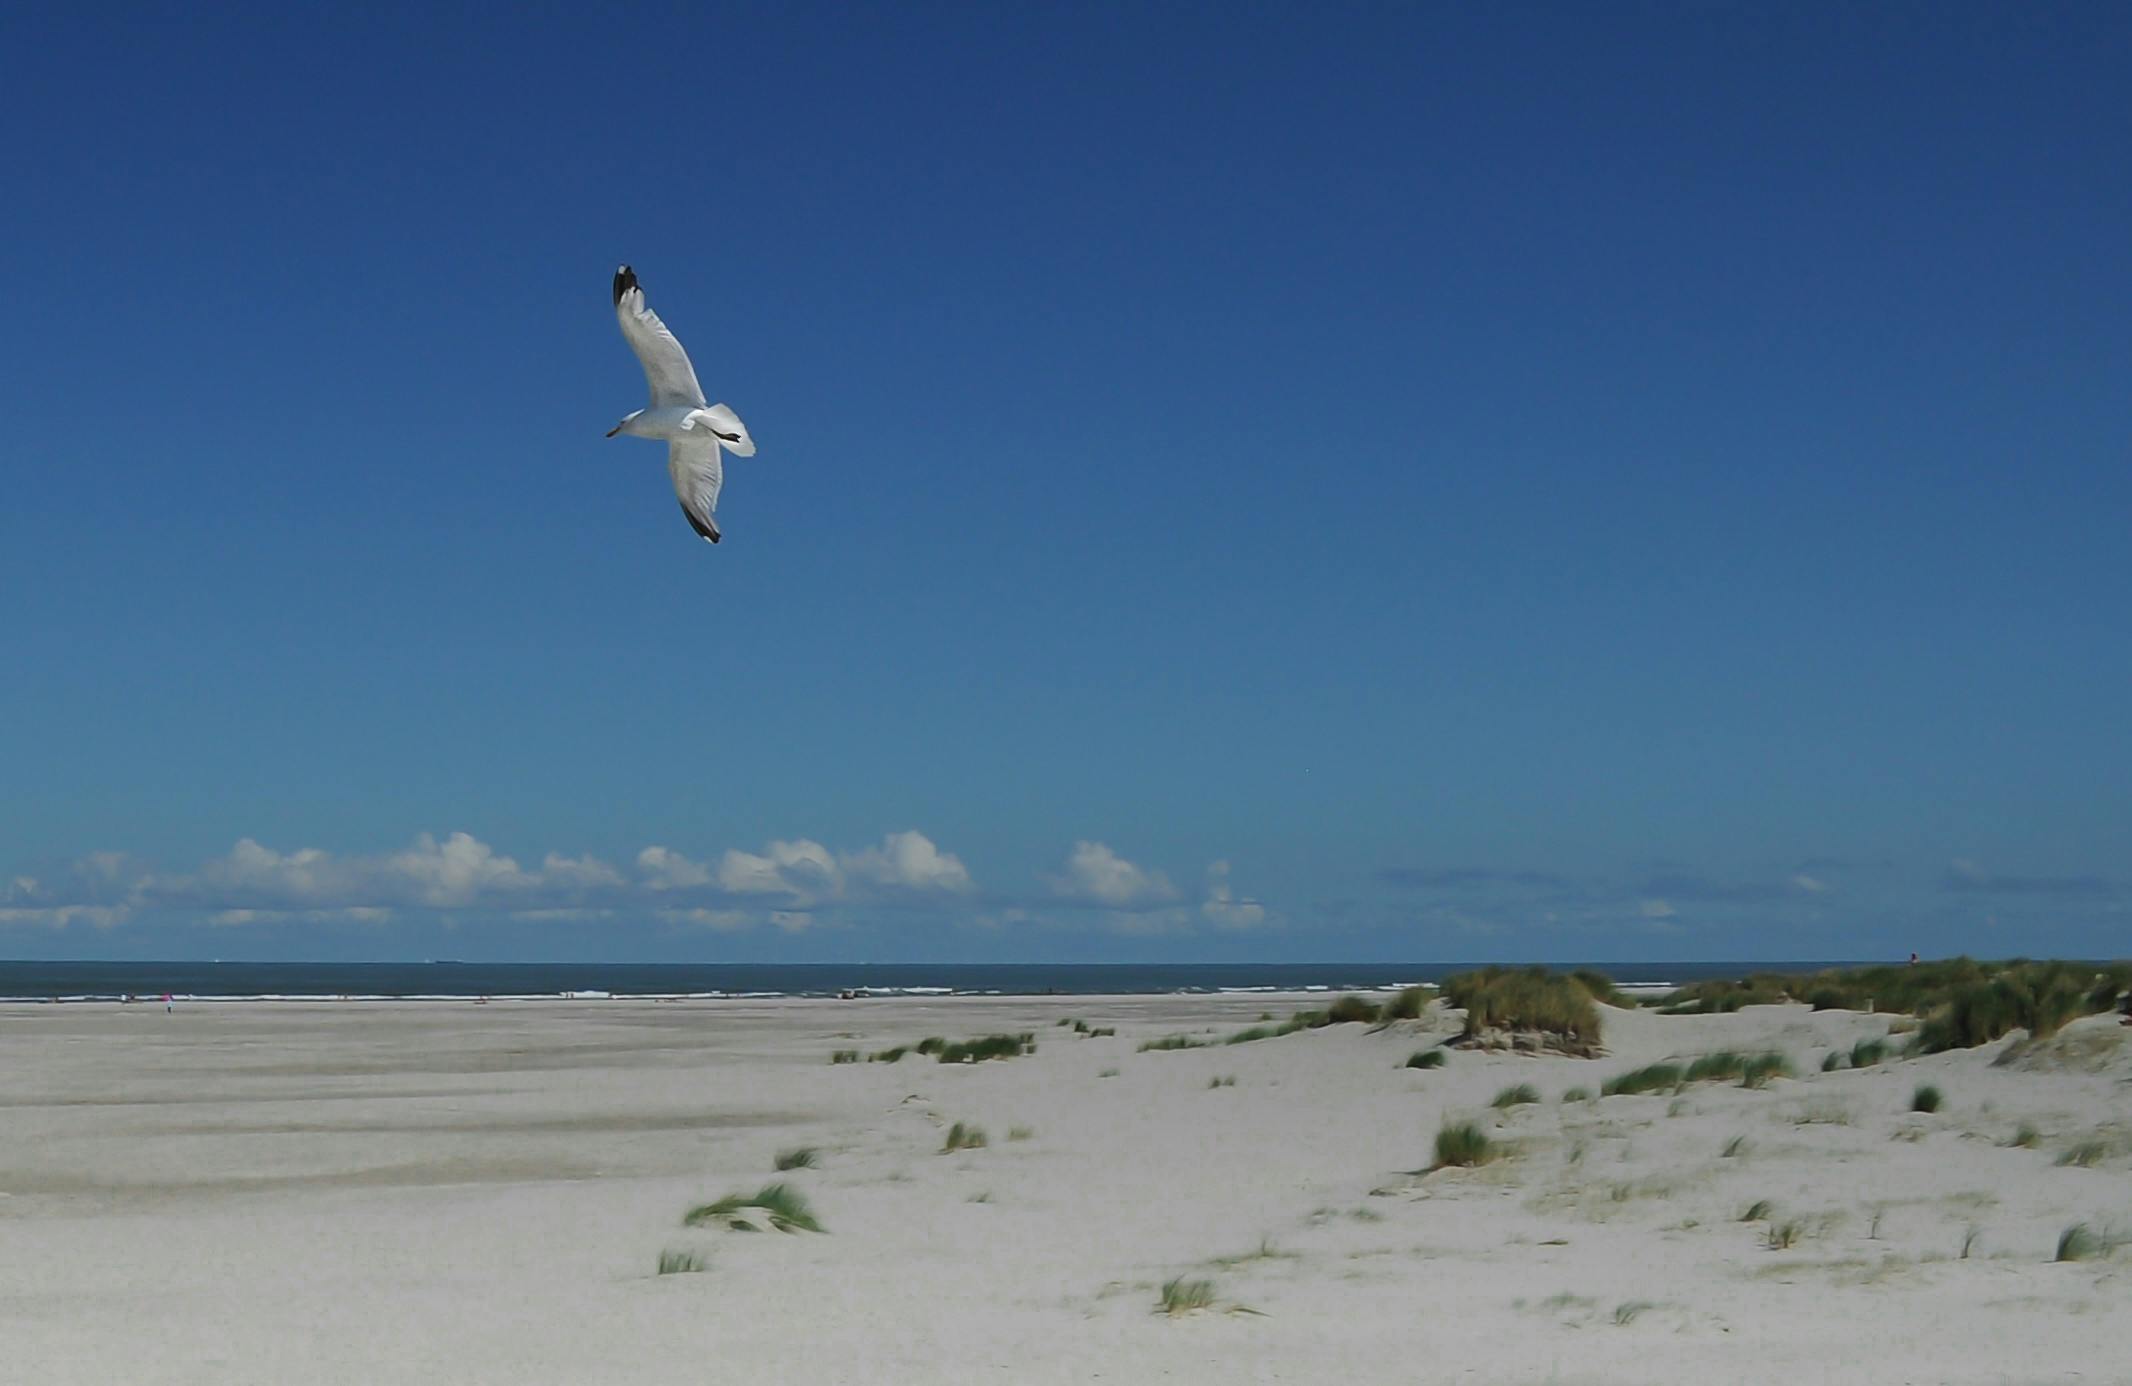 a bird flies low to the ground at a beach